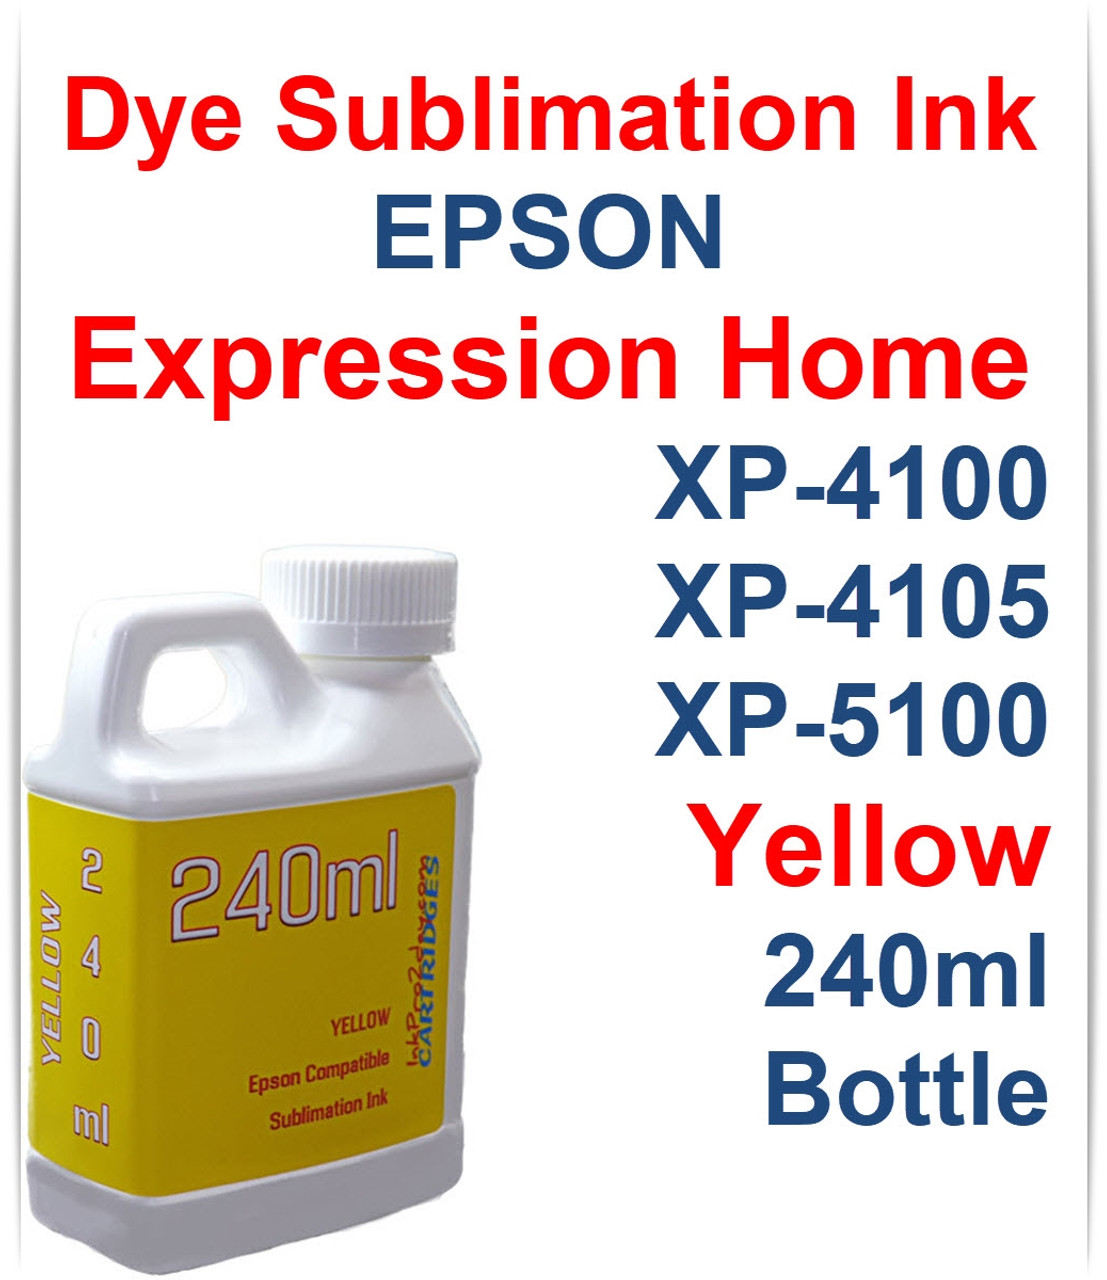 Yellow 240ml bottle Dye Sublimation Ink for Epson Expression Home XP-4100 XP-4105 XP-5100 Printers